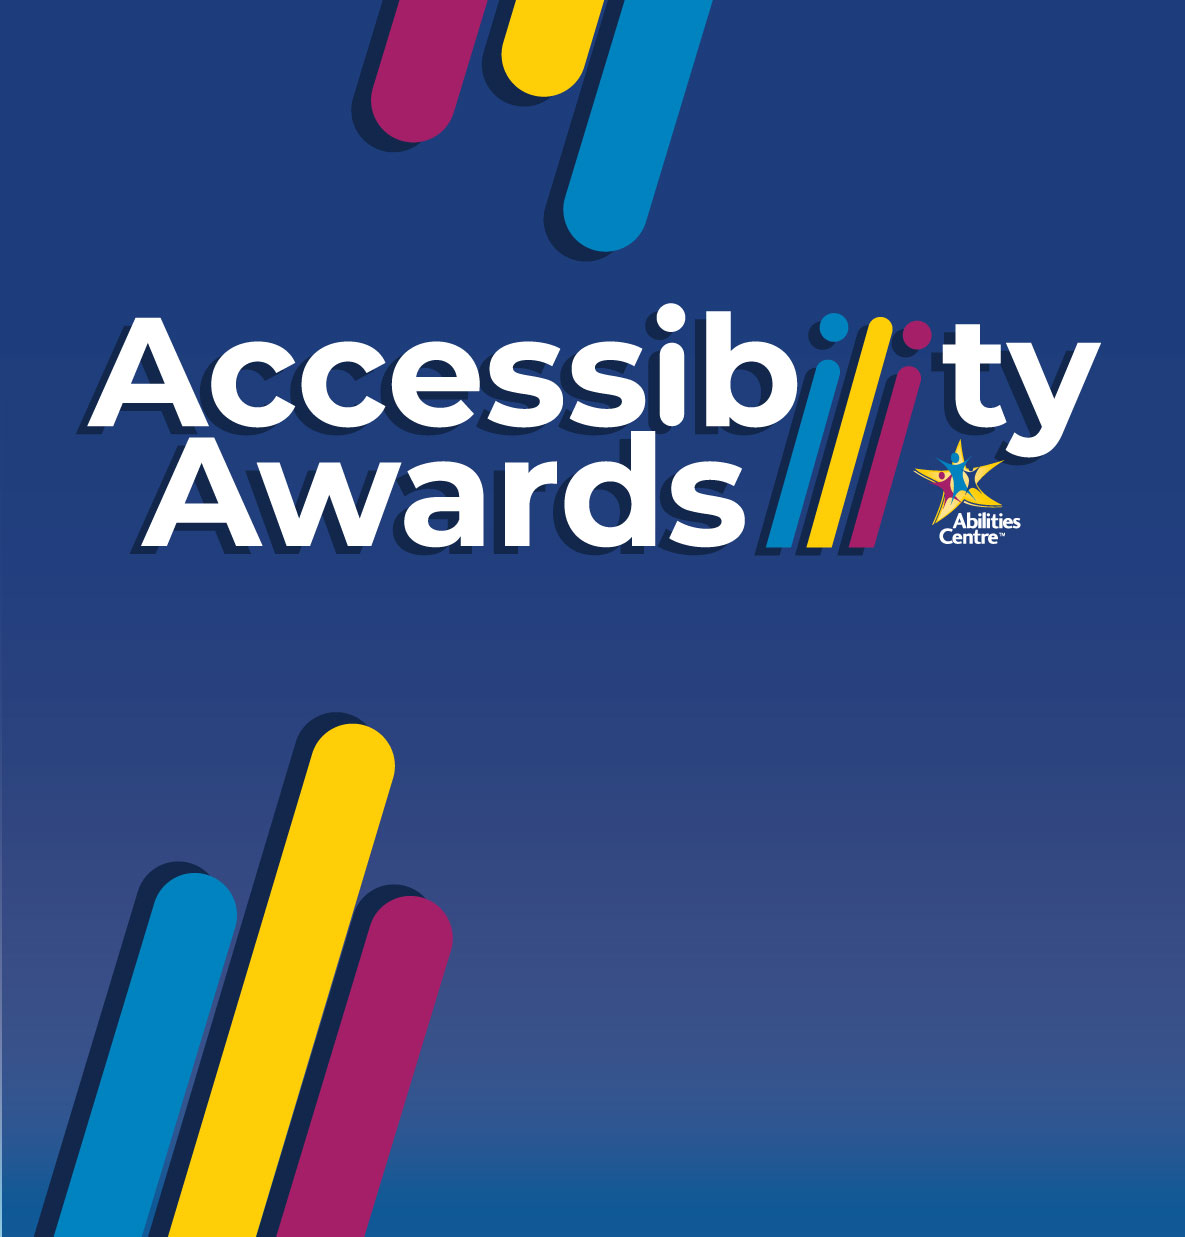 Accessibility Awards 